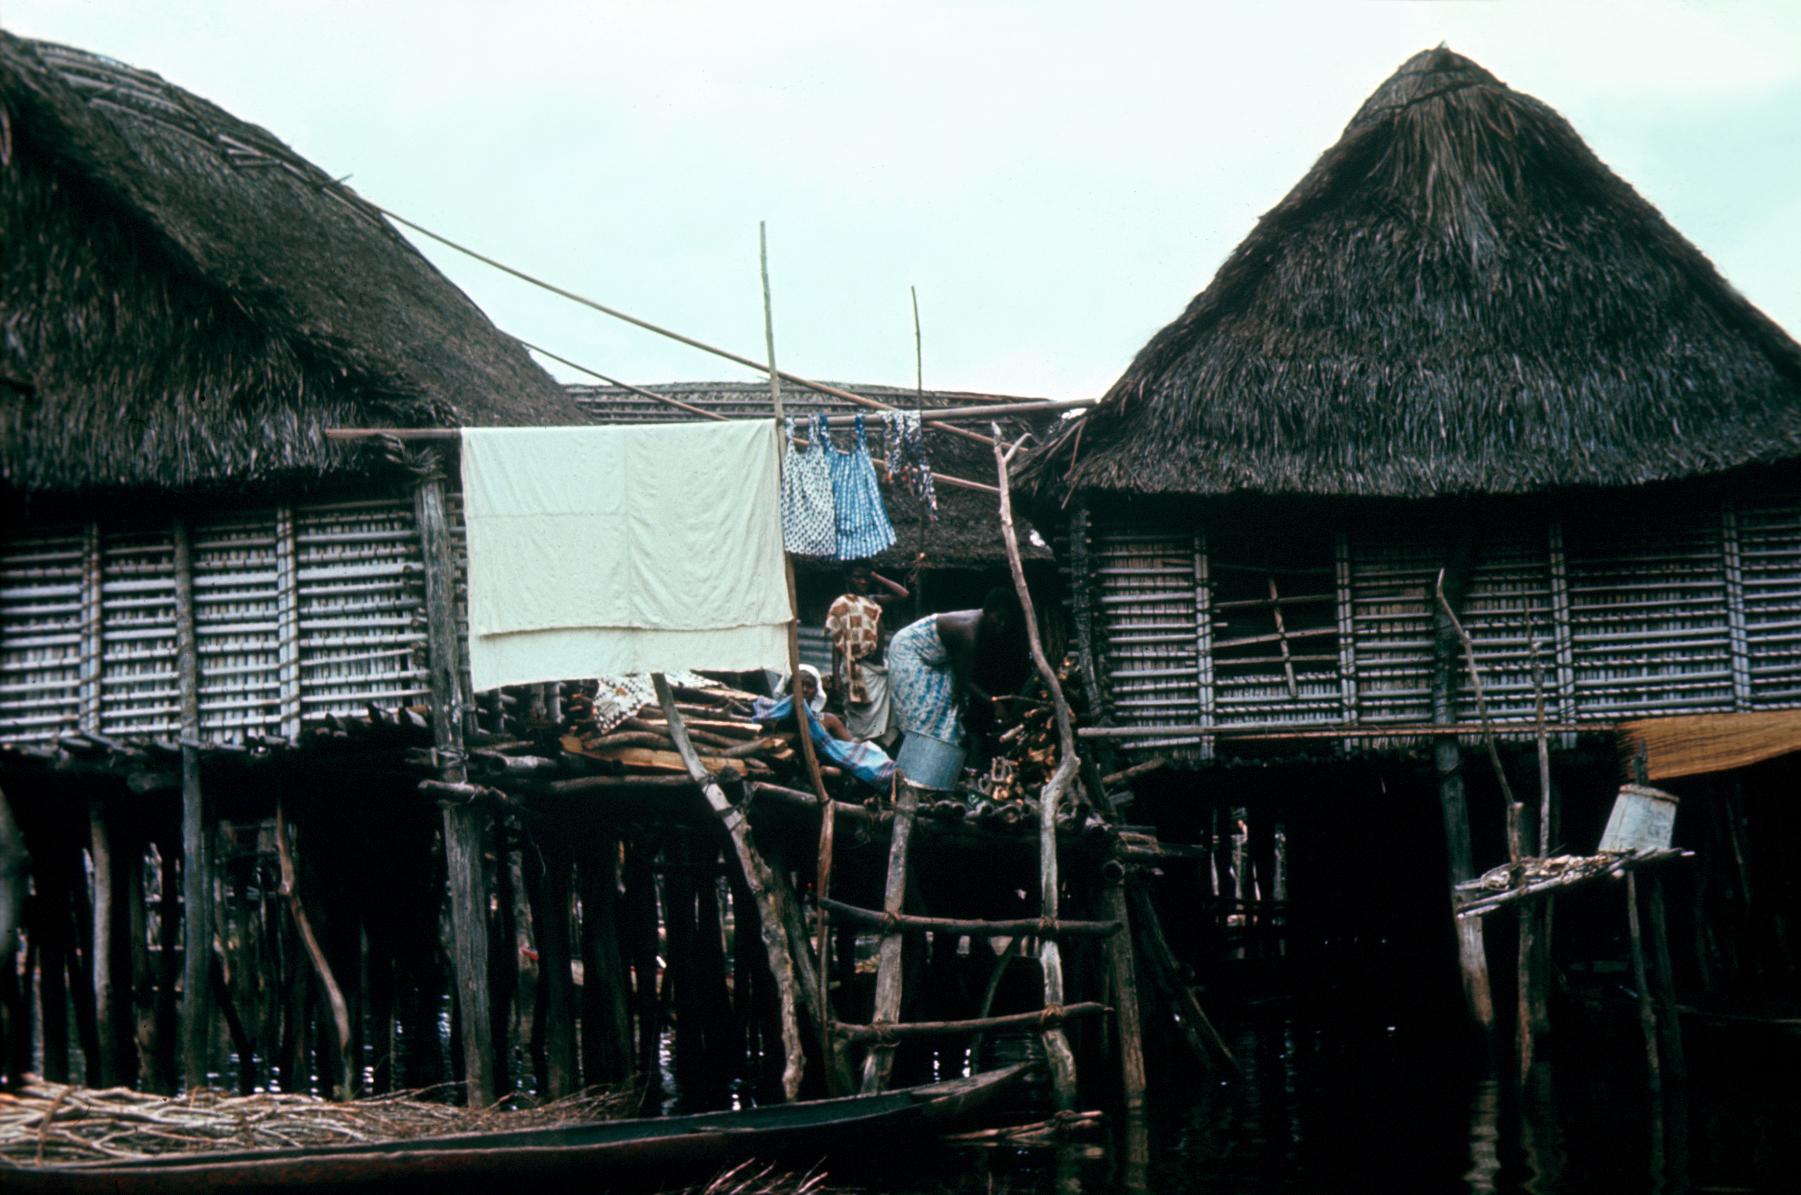 Clothes Washing at a House in the Lake Village of Ganvié